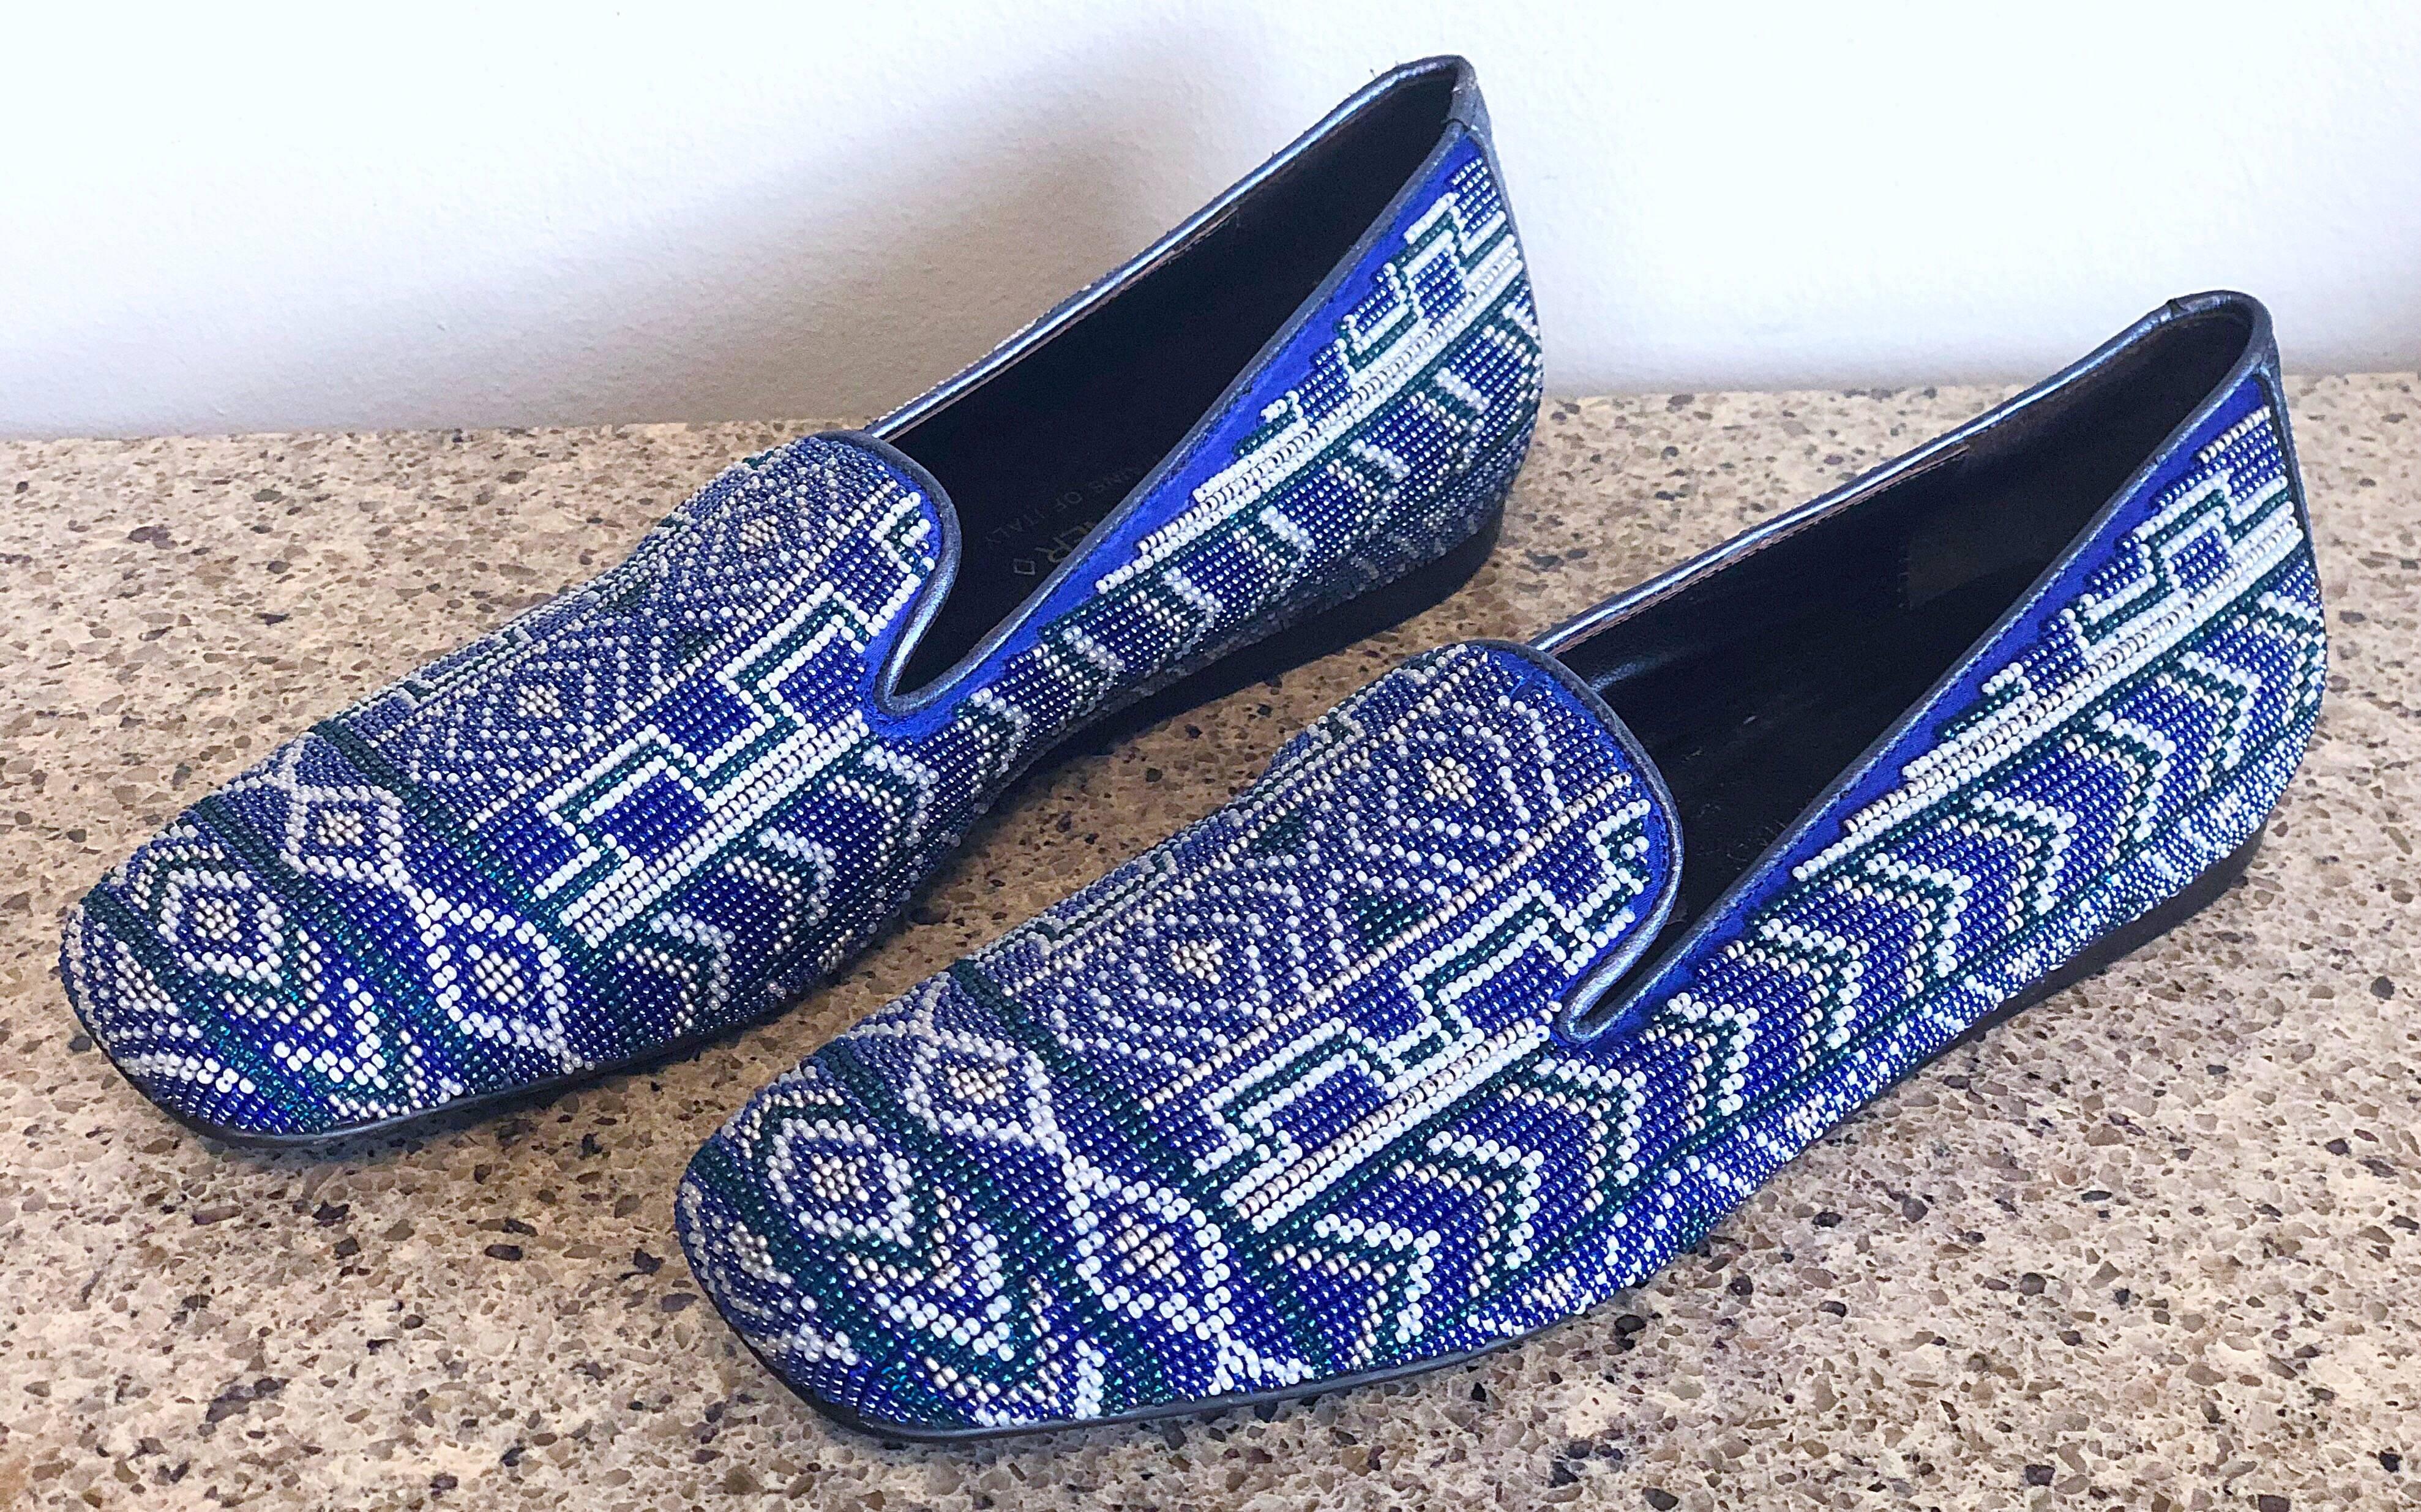 Brand New 1990s Donald J Pliner Size 7 Fully Beaded Blue Smoking Loafers Shoes 1